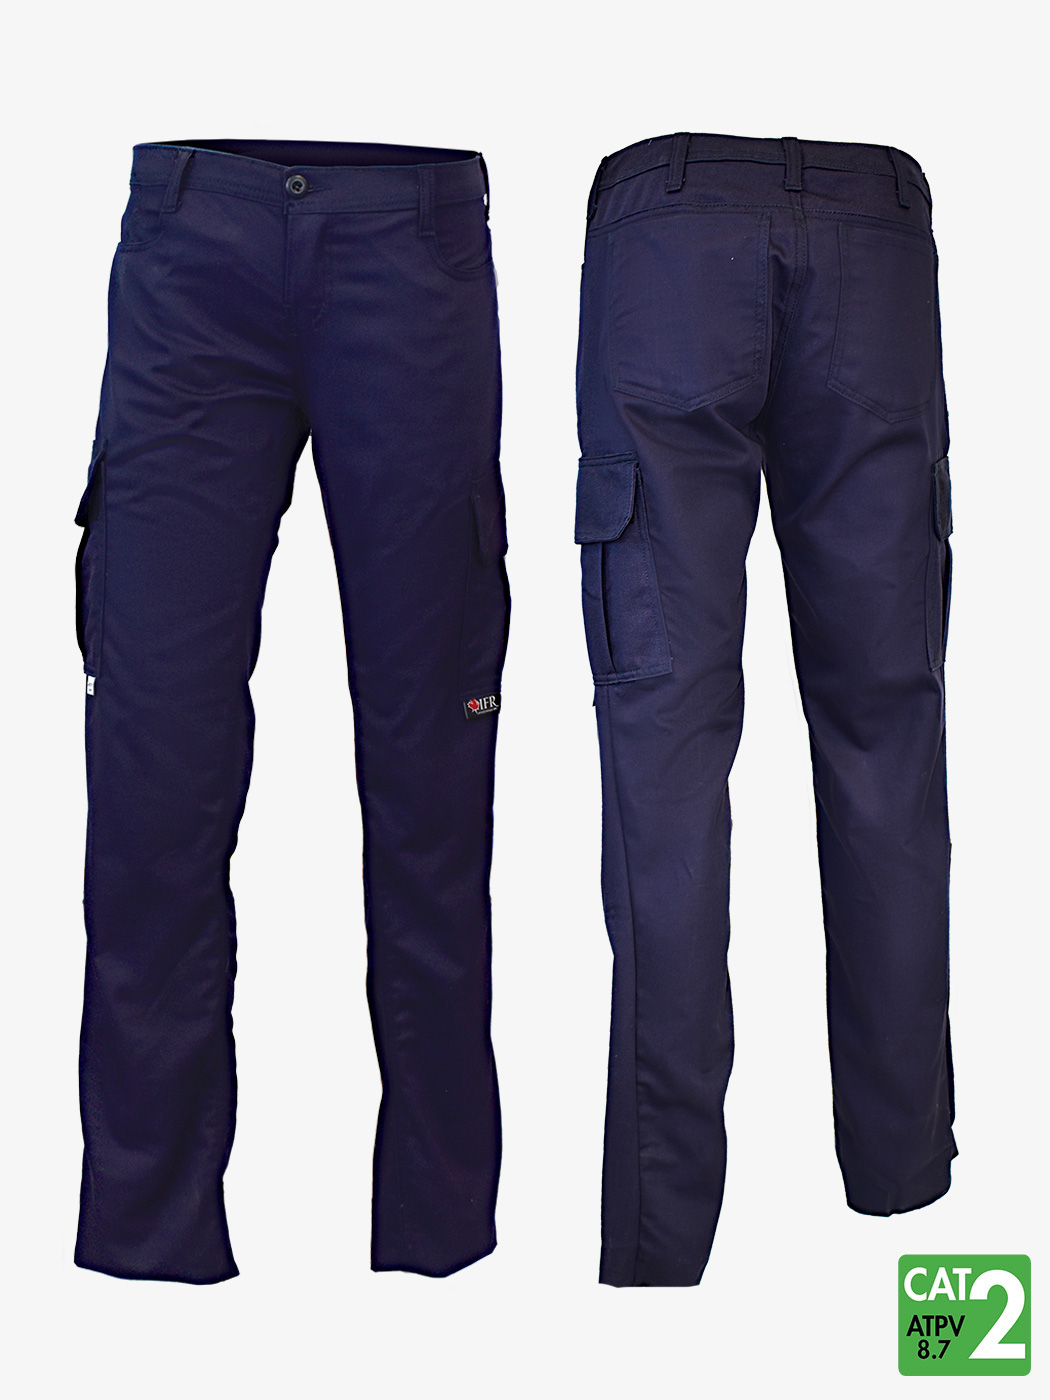 CARGO PANTS A COMPARISON OF MEN'S AND WOMEN'S DESIGNS – Budget Workwear